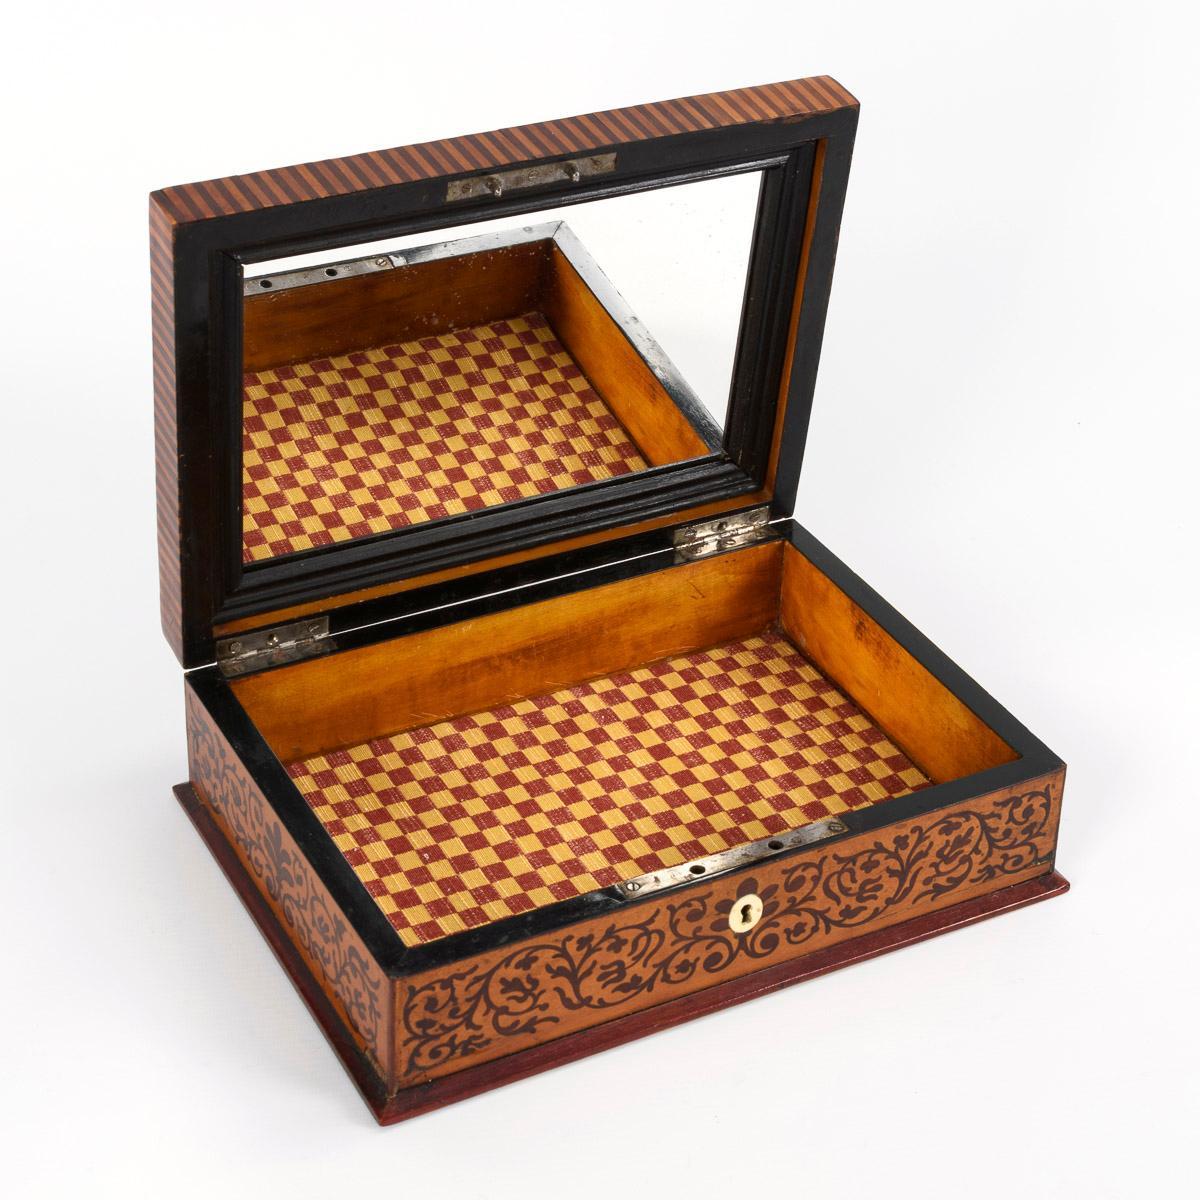 Anonymous
European; 19th century

Approximate size: 8.5 x 28 x 20 cm

The present box features intricate marquetry depicting patterned scrollwork on its top and sides and handsome striped banding around its lid. The lid is hinged and a mirror